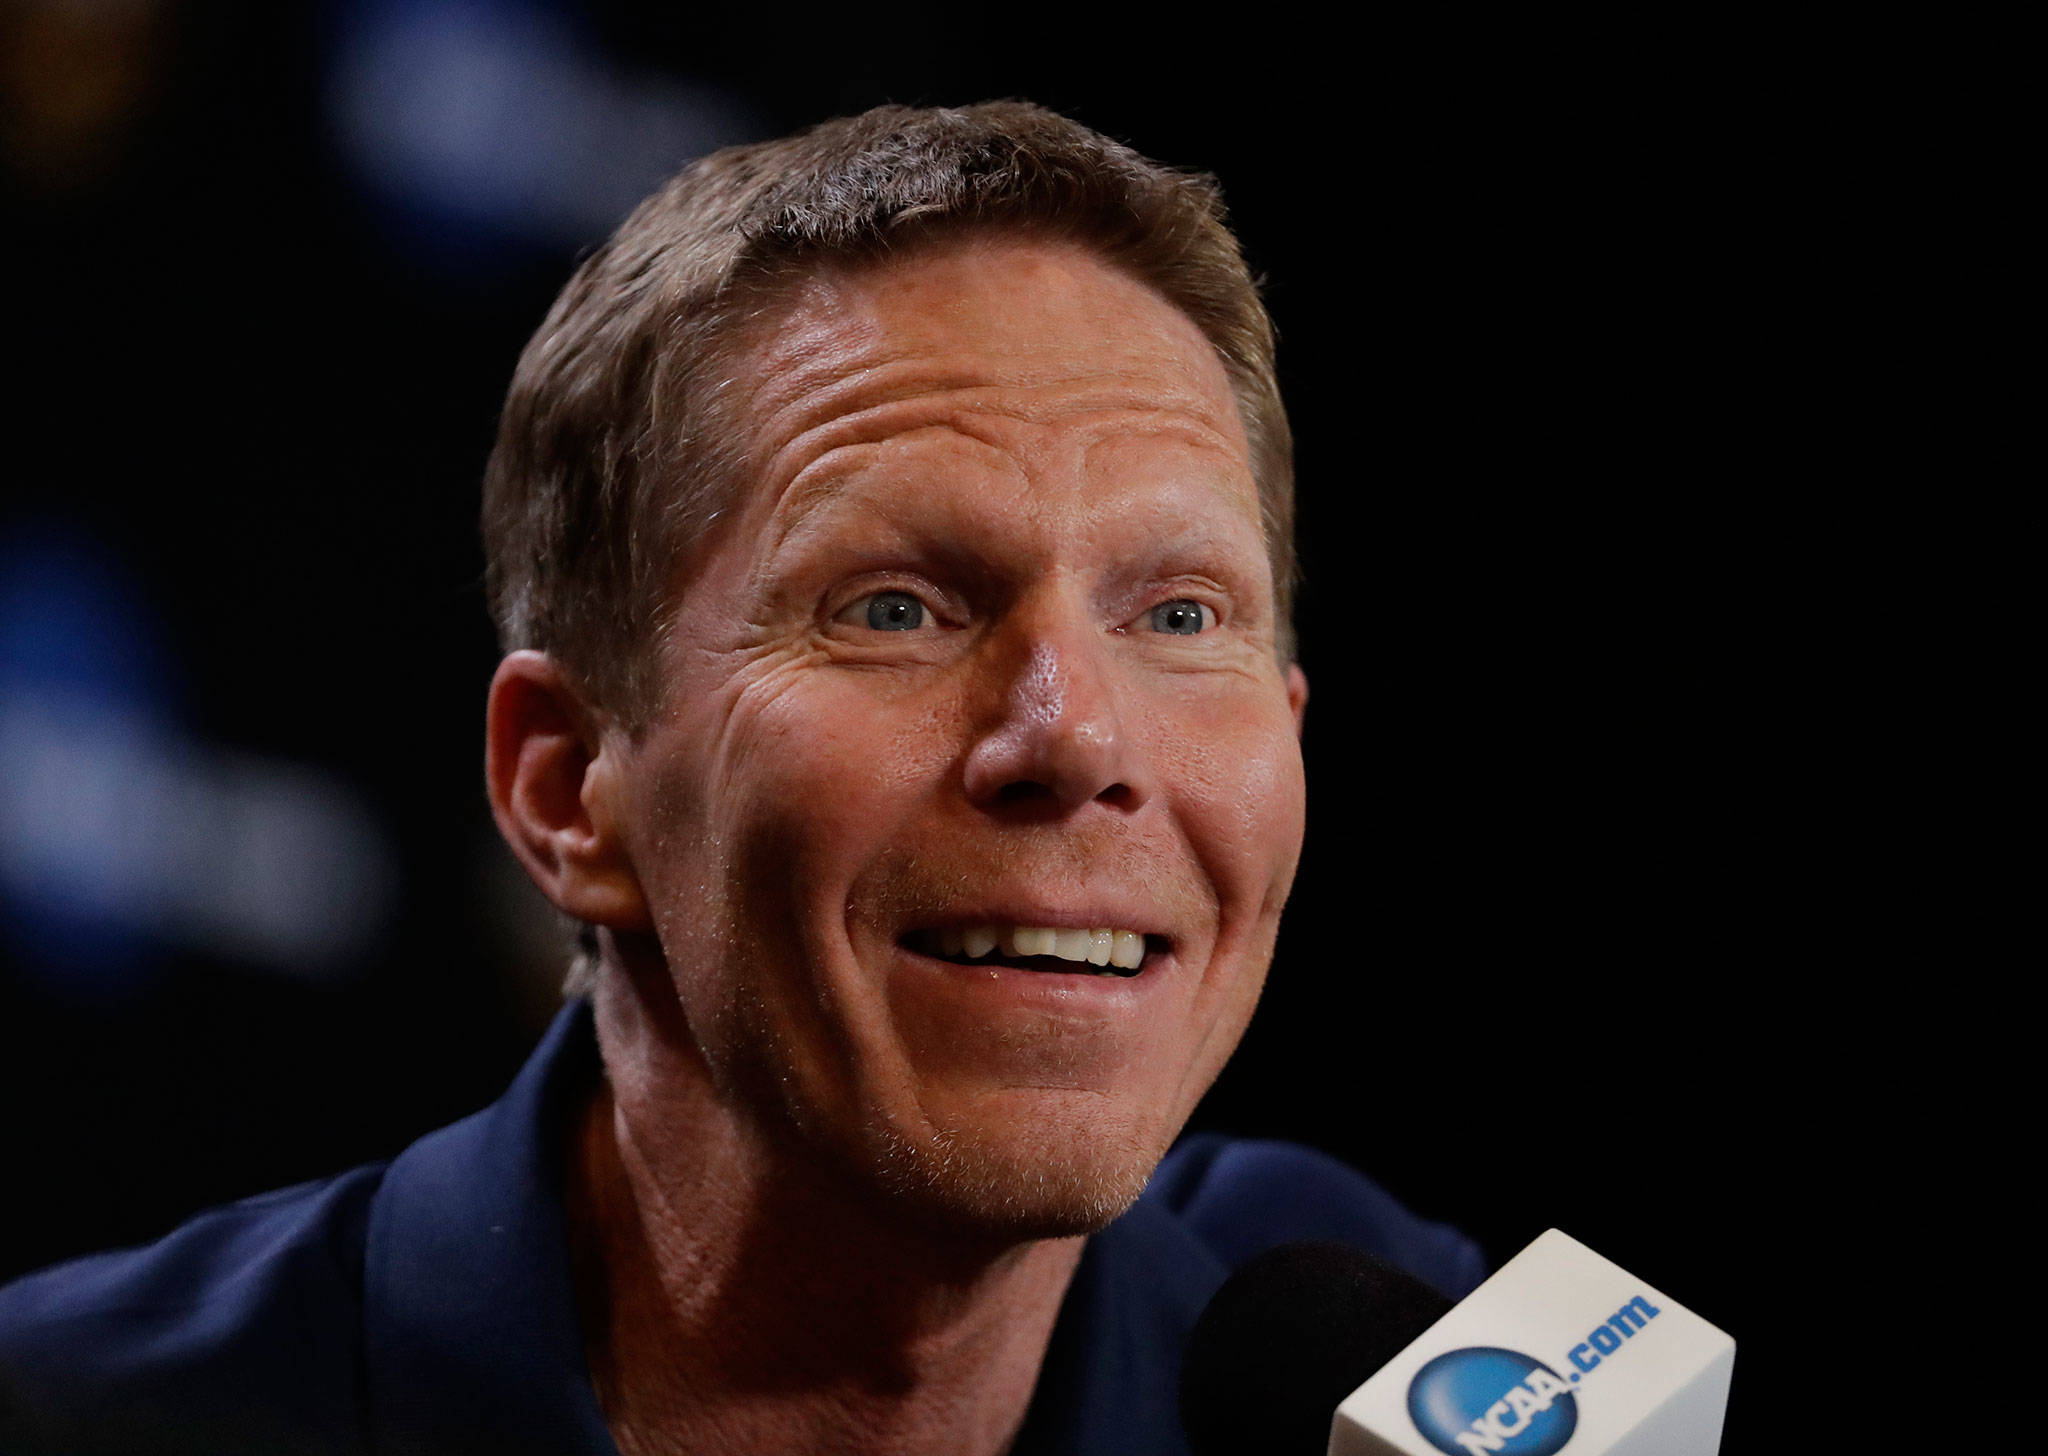 Gonzaga men’s basketball coach Mark Few listens to a question Thursday after a practice session for the NCAA Final Four in Glendale, Arizona. (AP Photo/David J. Phillip)